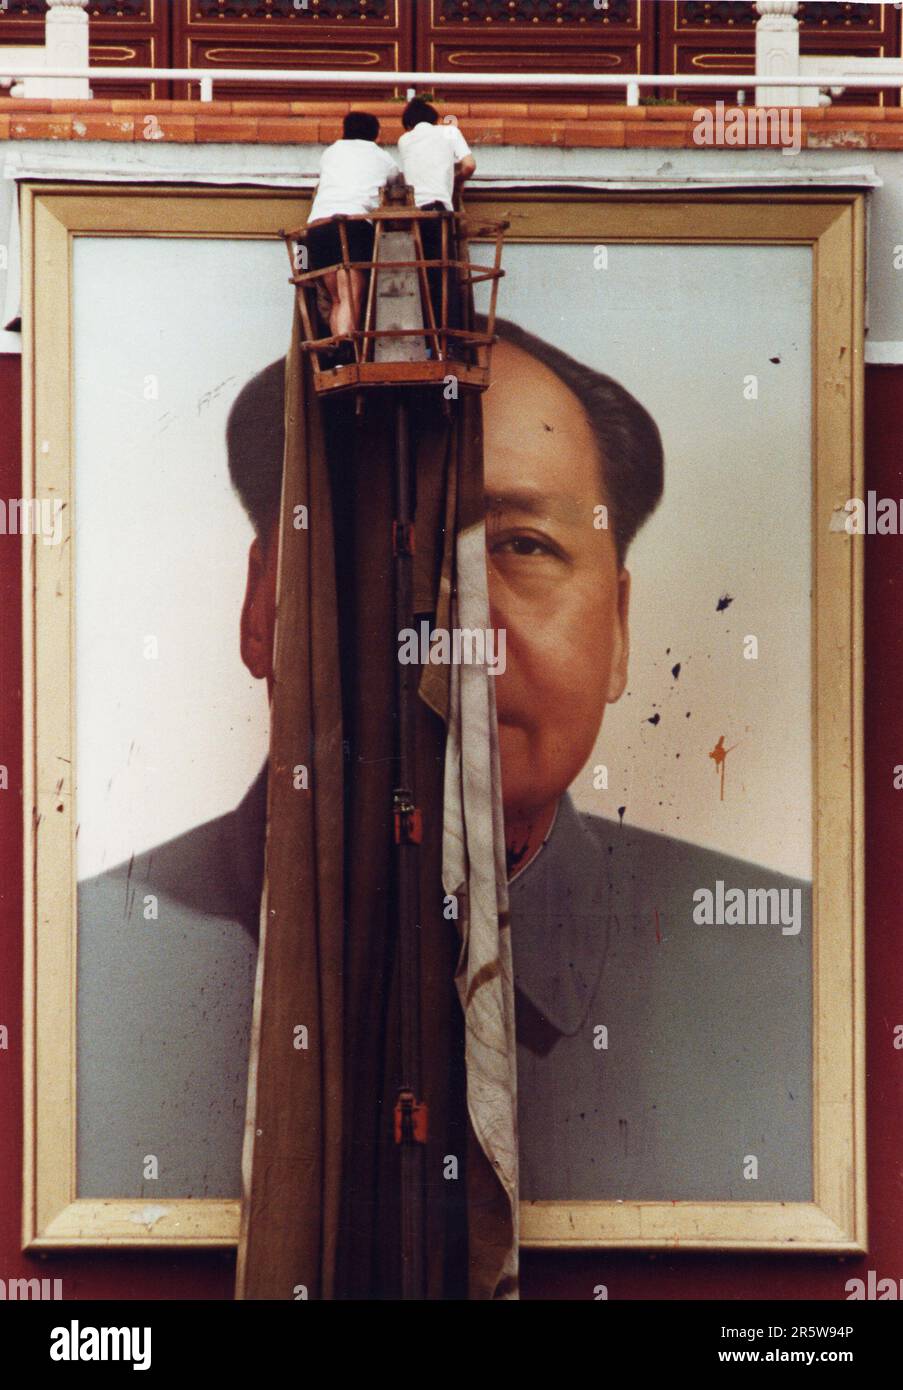 Workers cover the portrait of Chairman Mao presiding over Tiananmen Square after protesters defaced it with splatters of paint during pro-democracy demonstrations in 1989. Stock Photo